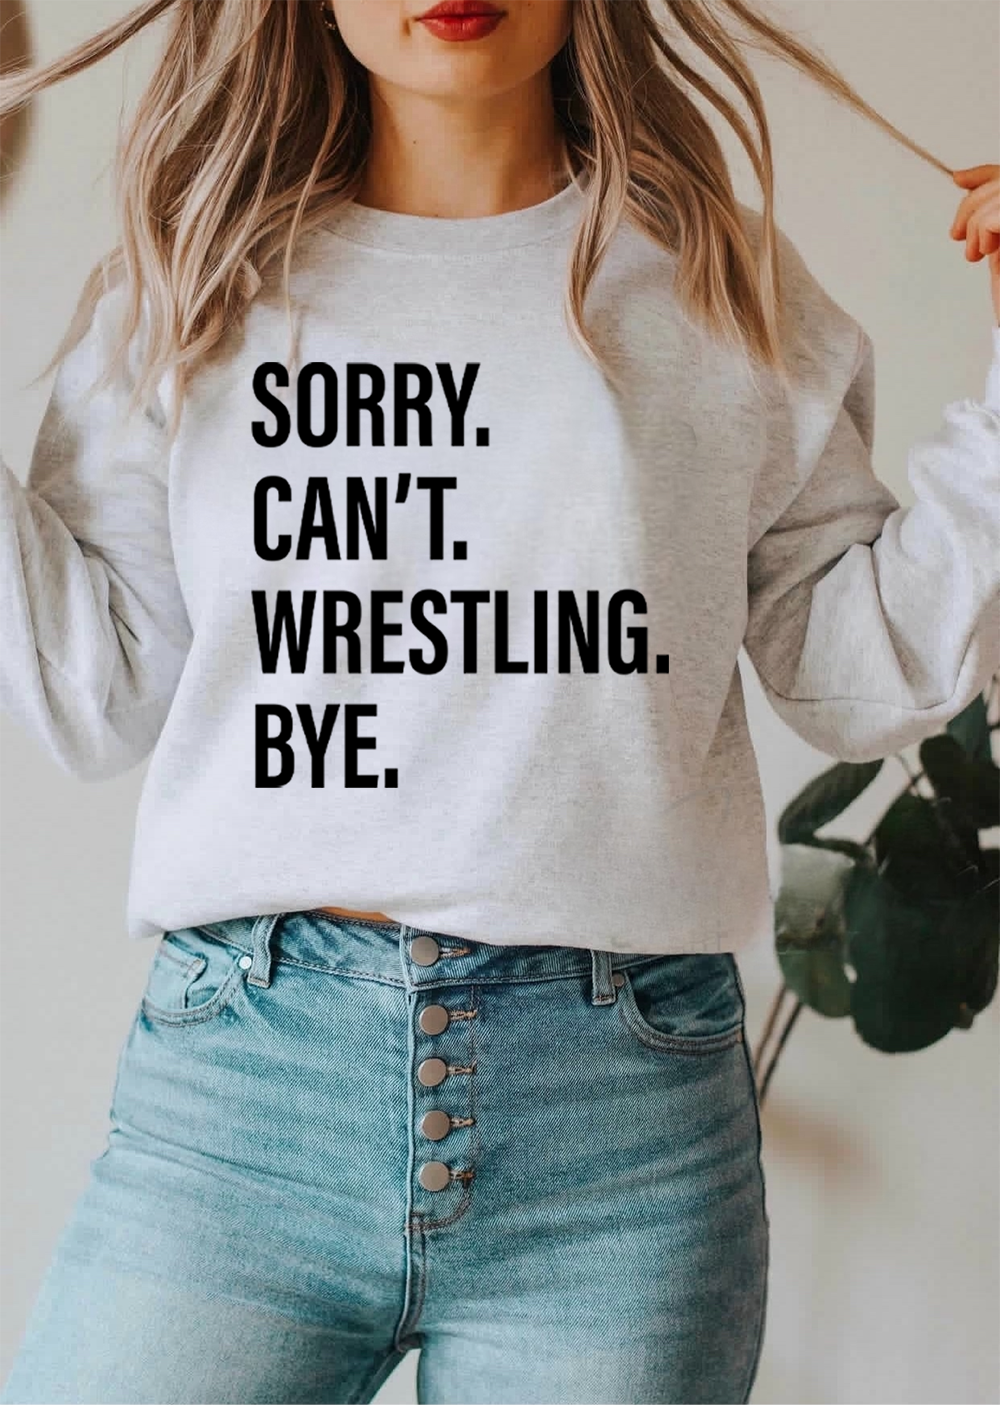 Sorry. Can't. WRESTLING. Bye.